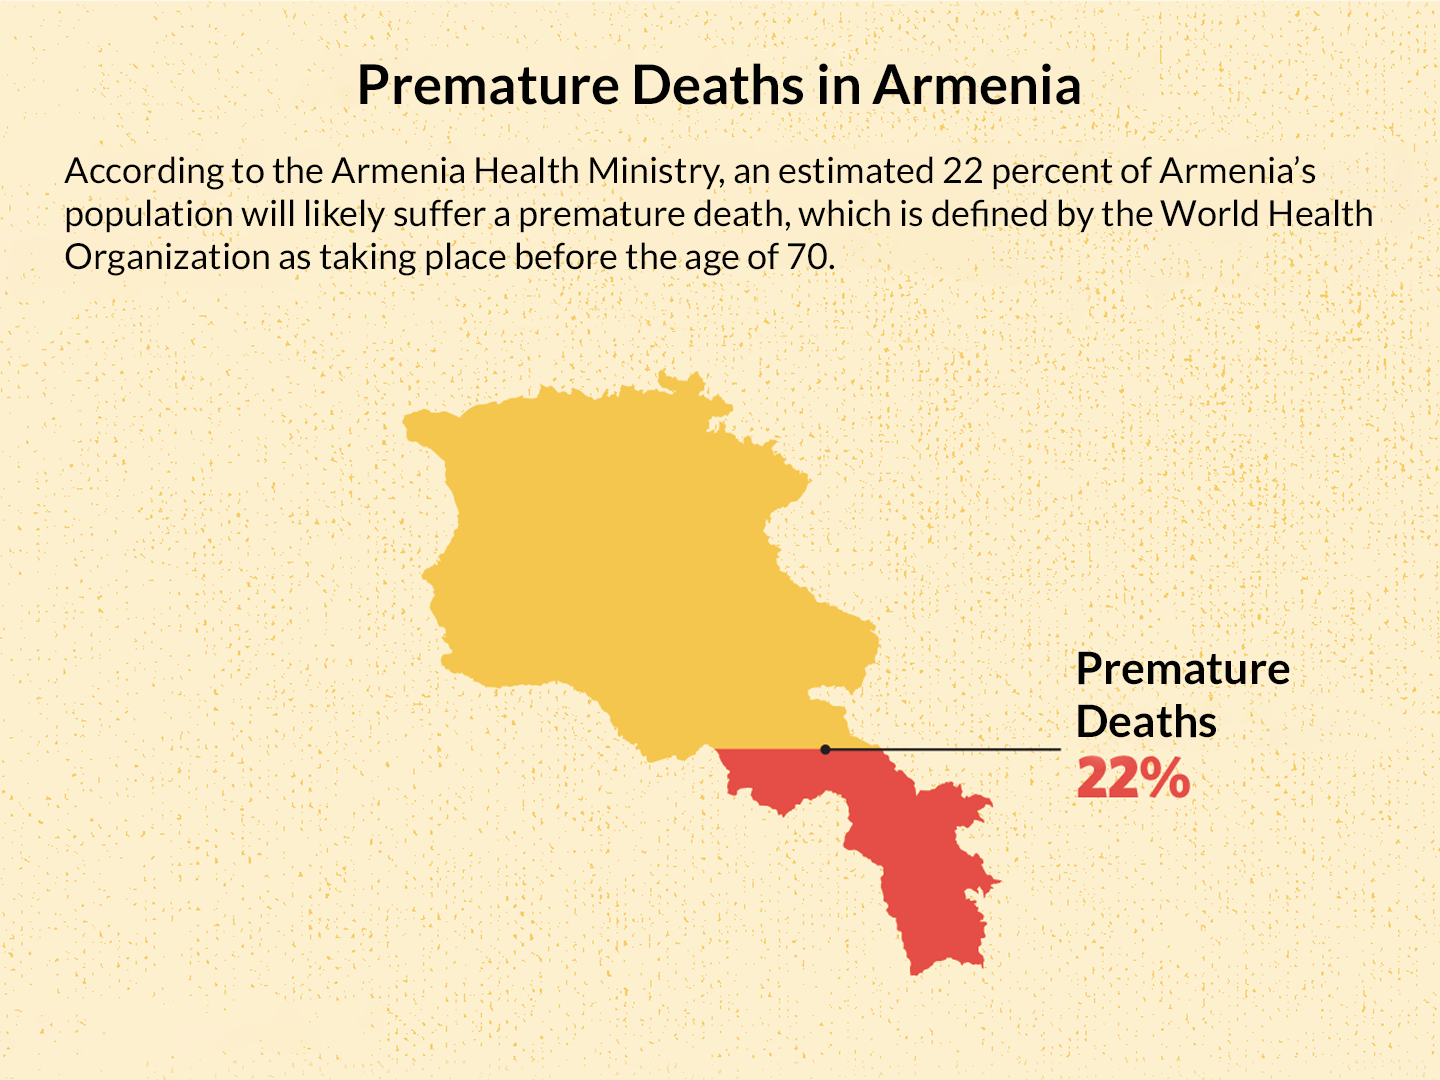 A graph showing that premature deaths in Armenia make up for 22% of all deaths.